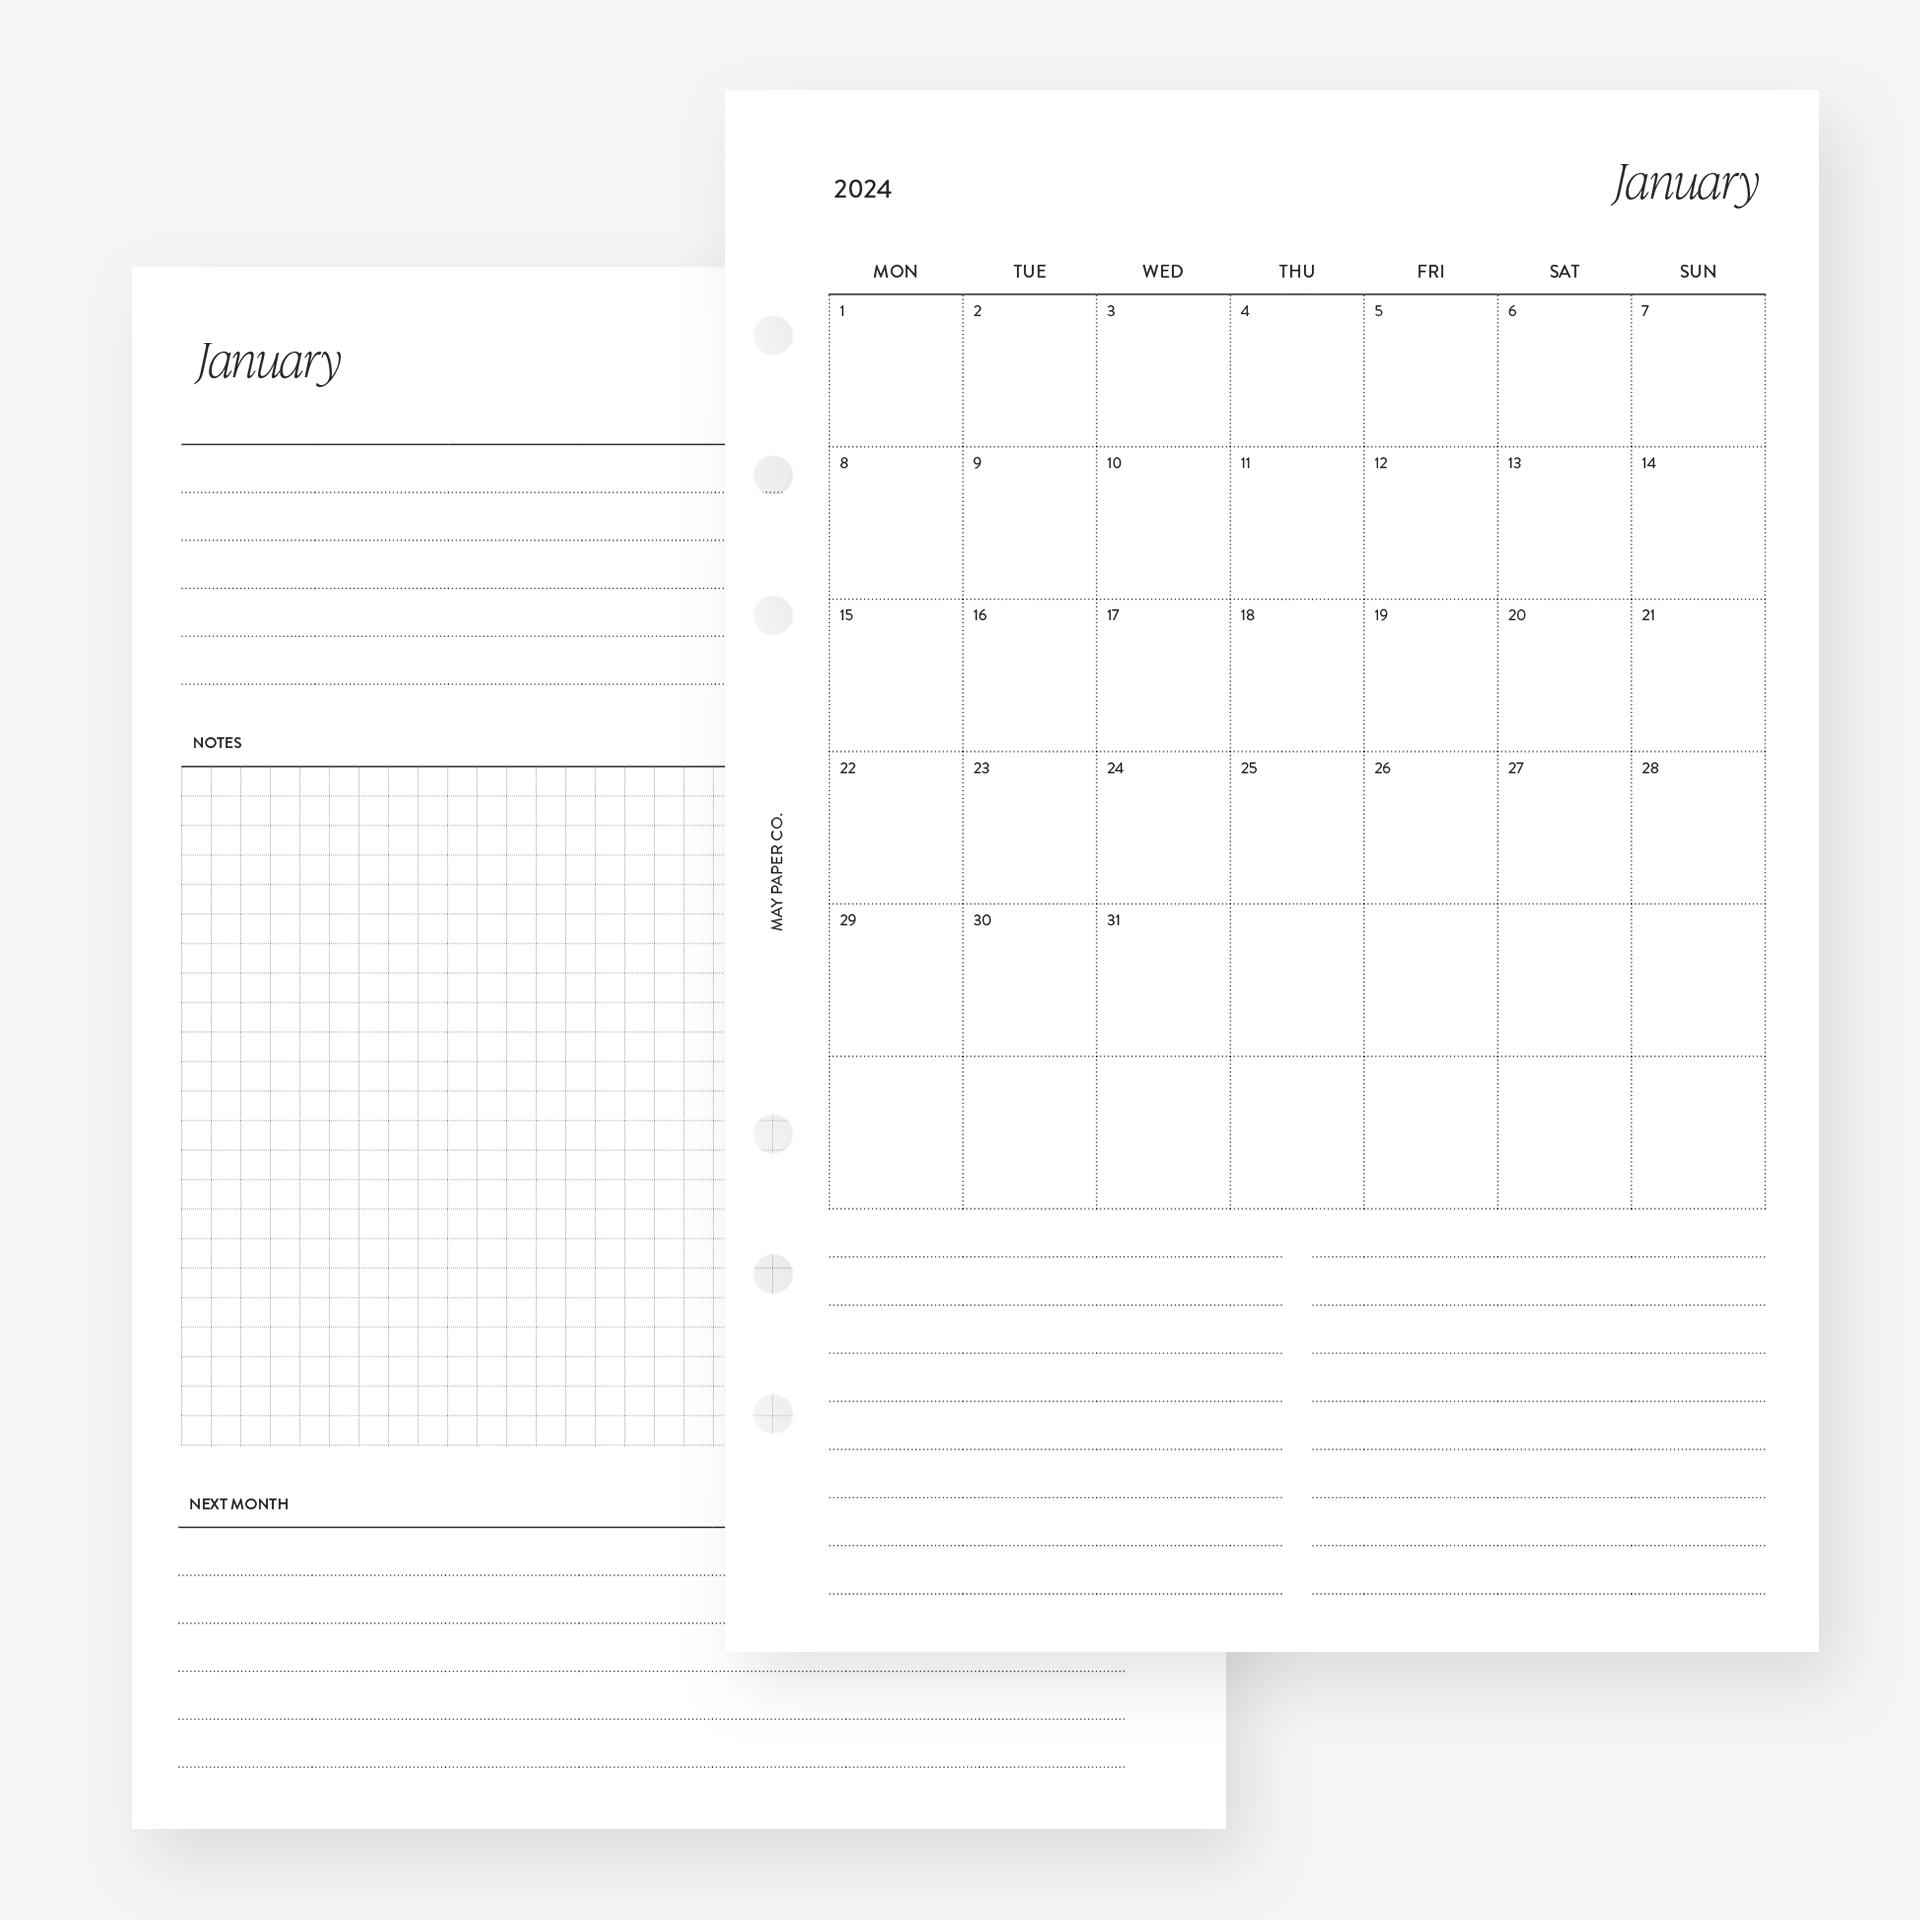 PRINTED Paper Refill Planner Insert Pages for Your A5 A6 MM 